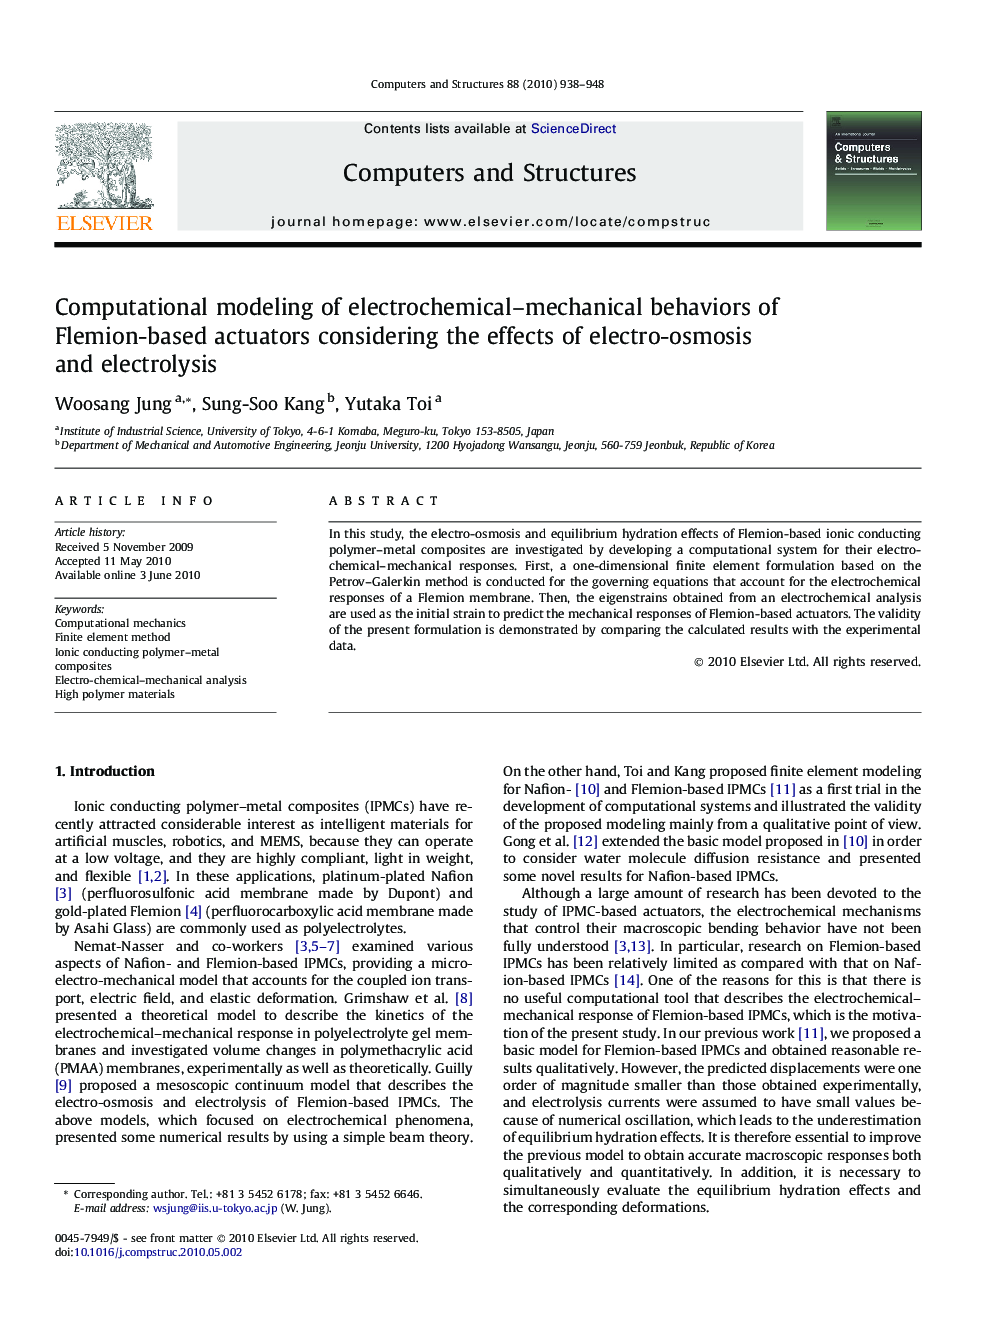 Computational modeling of electrochemical–mechanical behaviors of Flemion-based actuators considering the effects of electro-osmosis and electrolysis